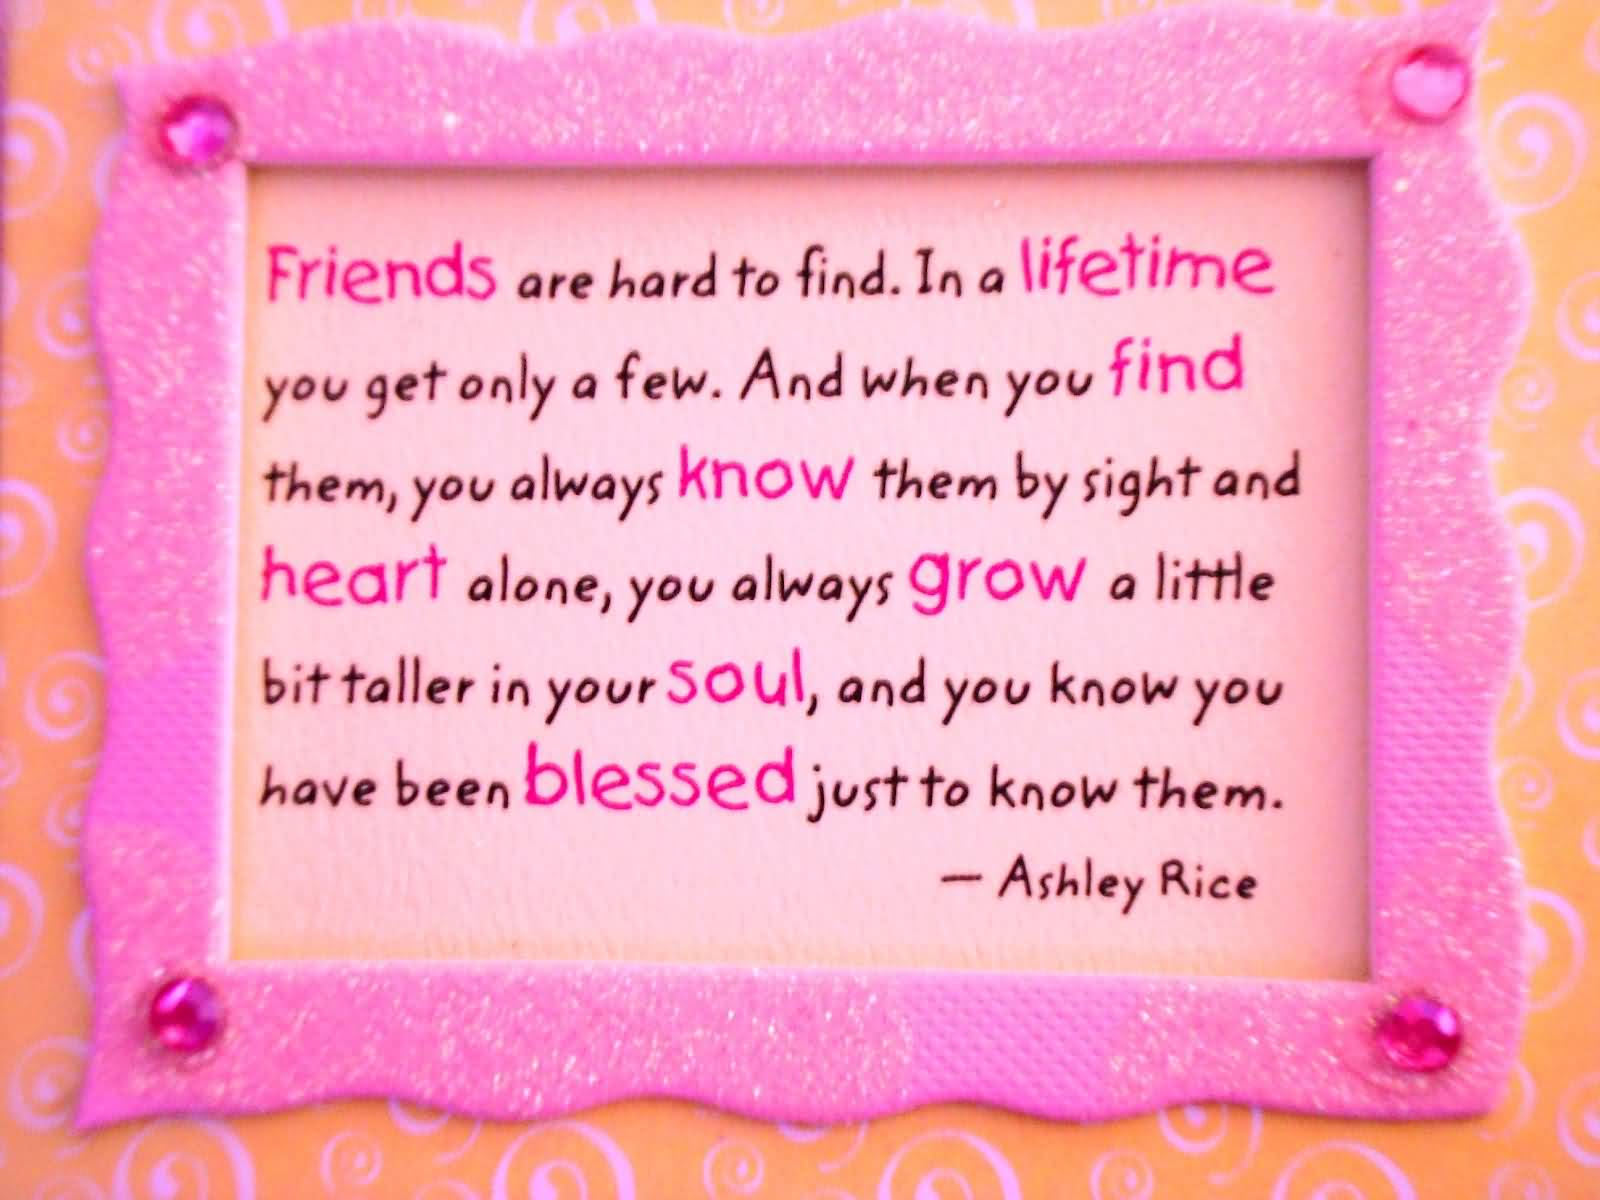 Friends are hard to find. In a lifetime you only get a few. And when you find them, you always know them by sight and heart alone, you always grow a little bit taller in your soul, and you know you have been blessed just to know them. - Ashley Rice